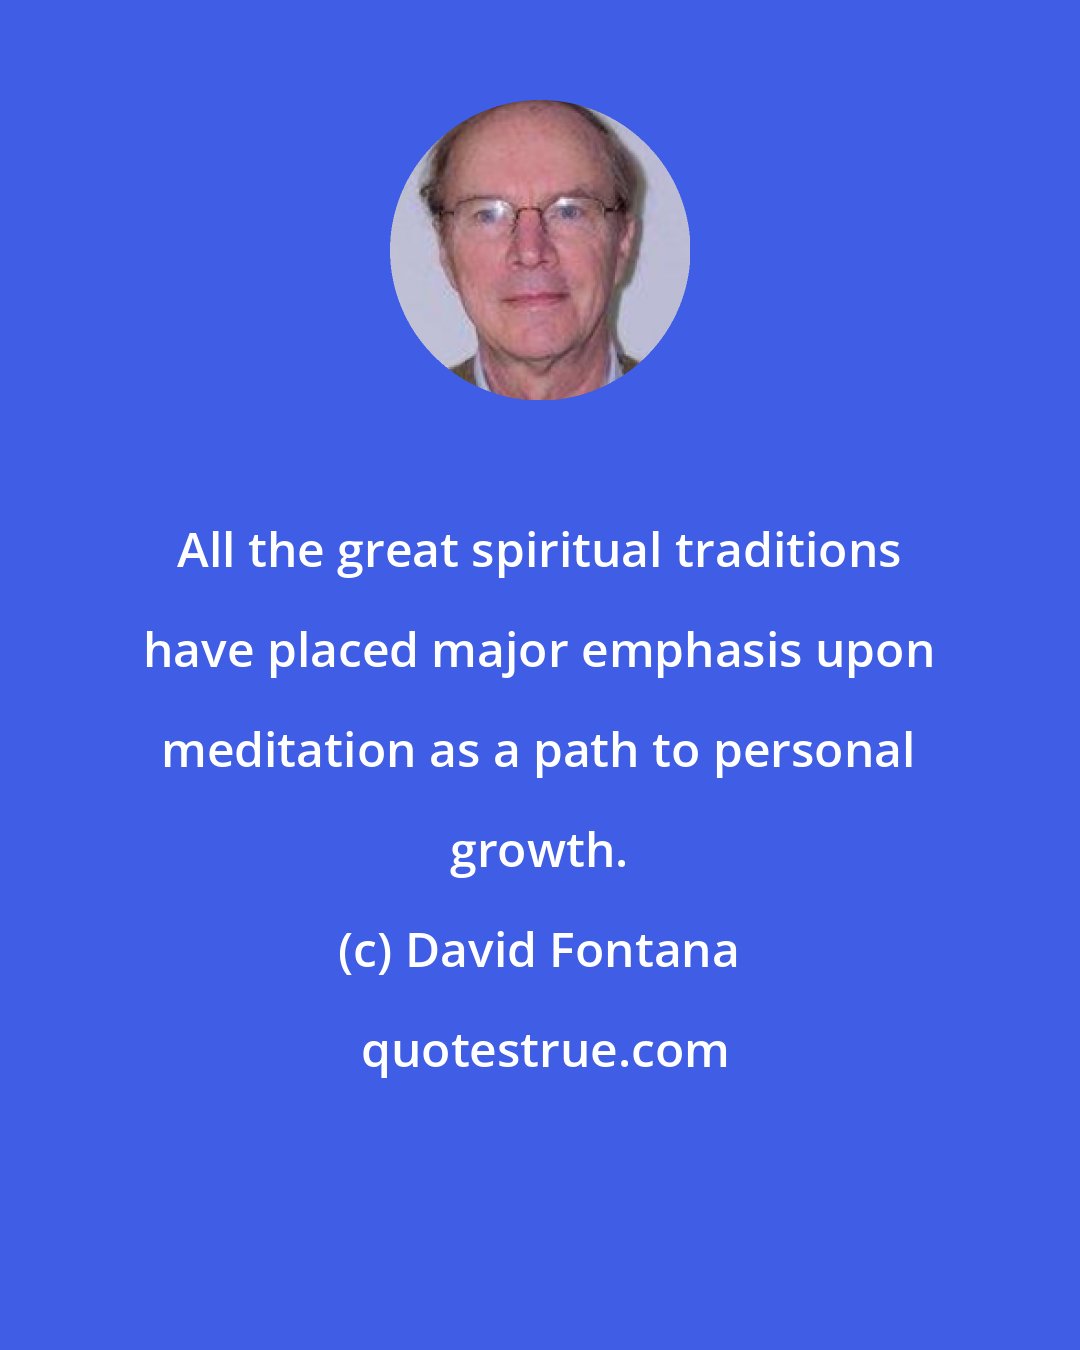 David Fontana: All the great spiritual traditions have placed major emphasis upon meditation as a path to personal growth.